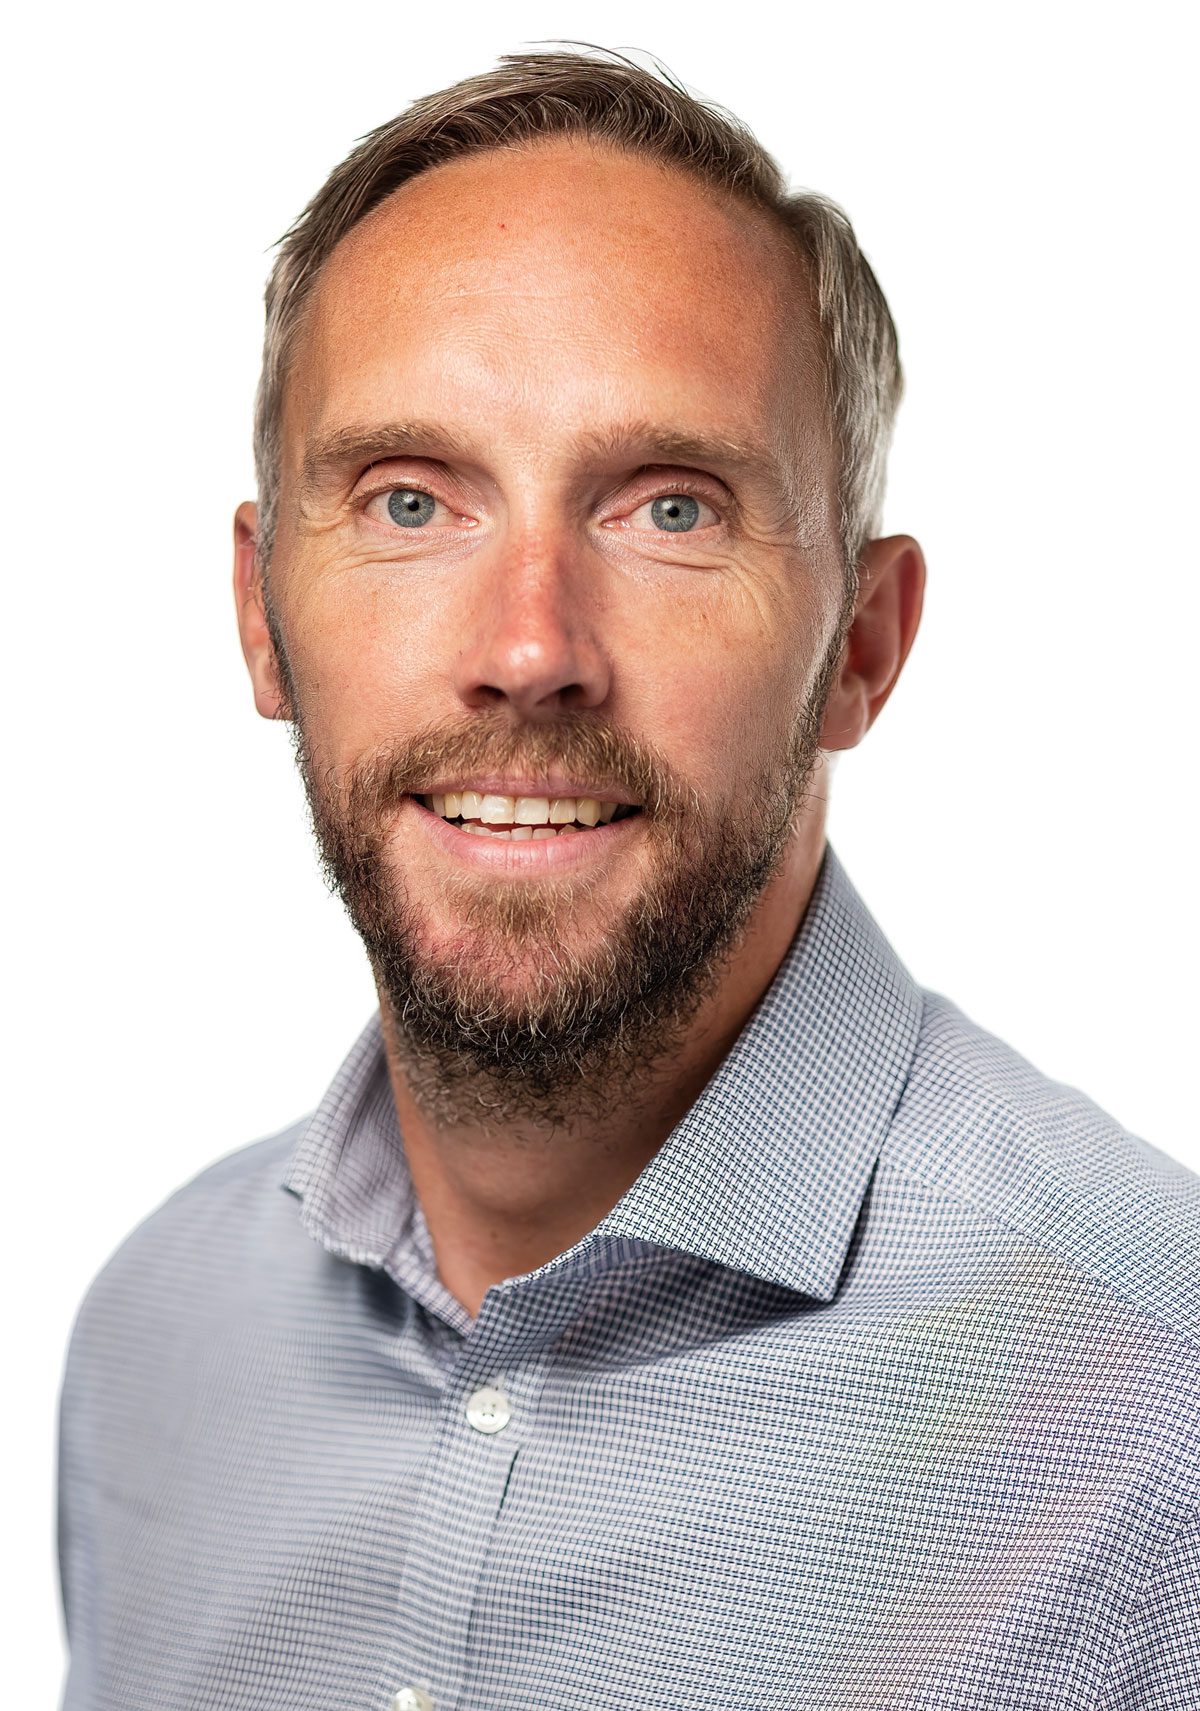 Matt Collins, trading director at KP Snacks, has Rugby World Cup advice for c-store retailers.